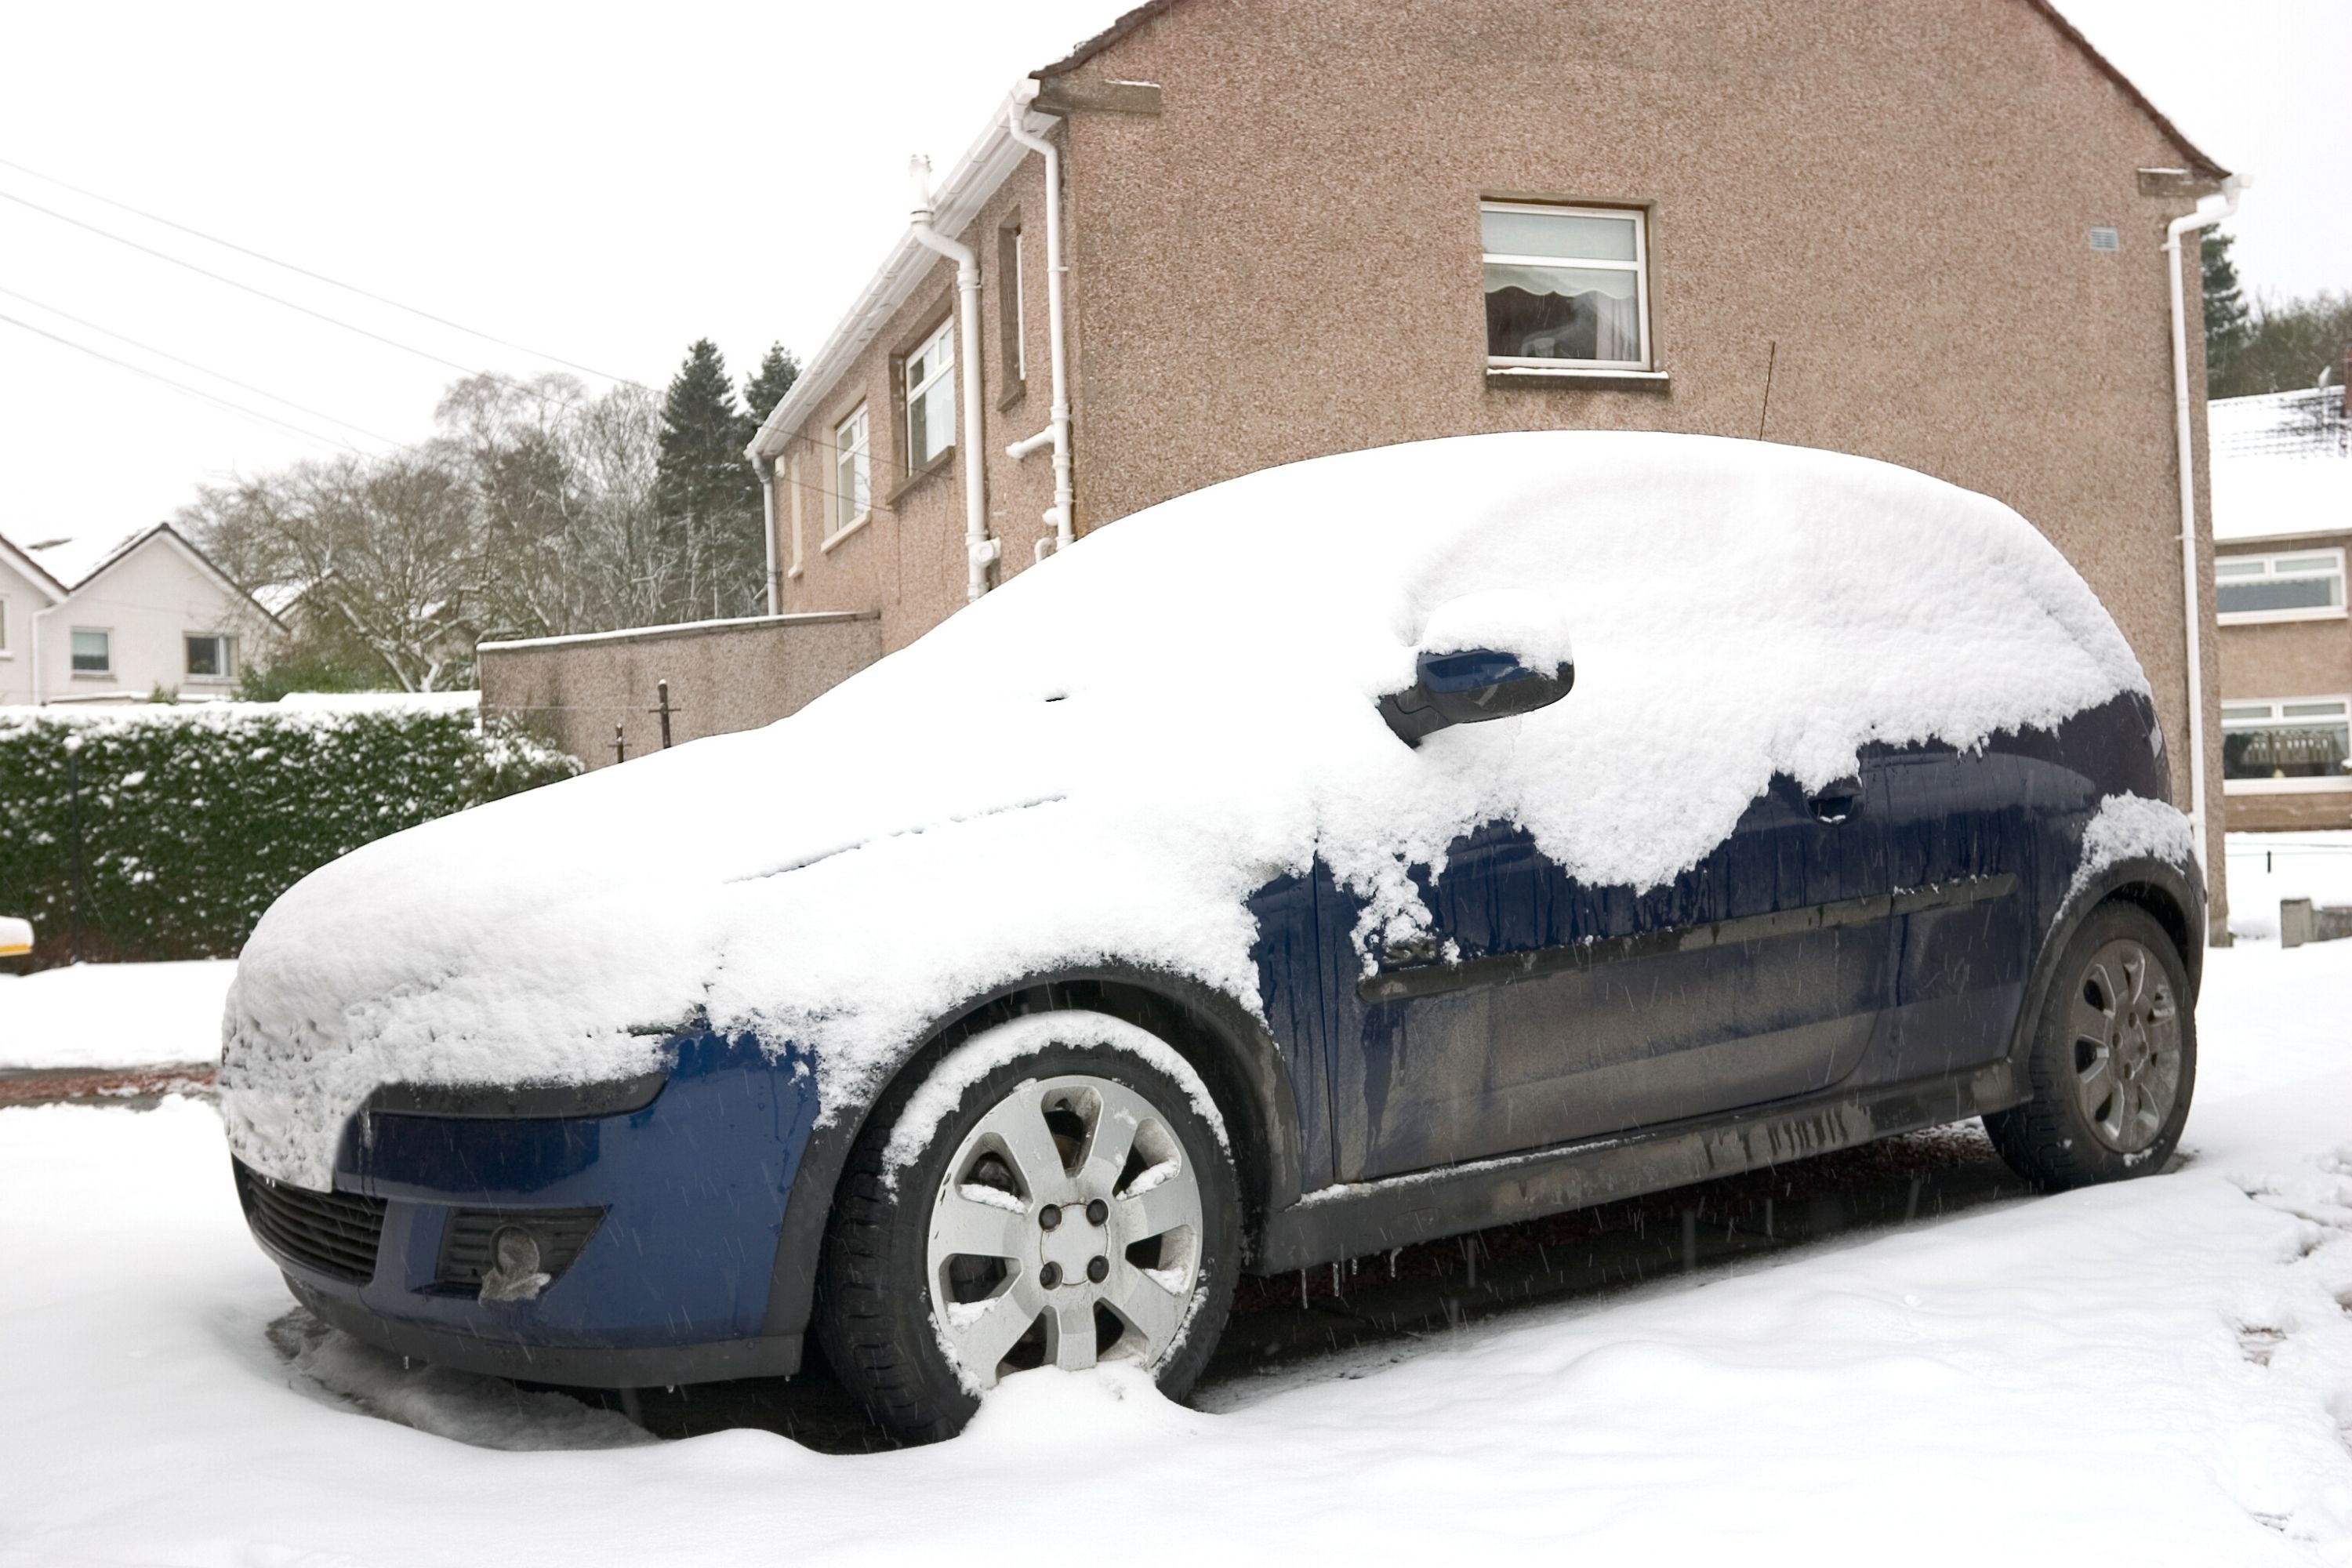 How to Get Snow Off Your Car Without Scratching It